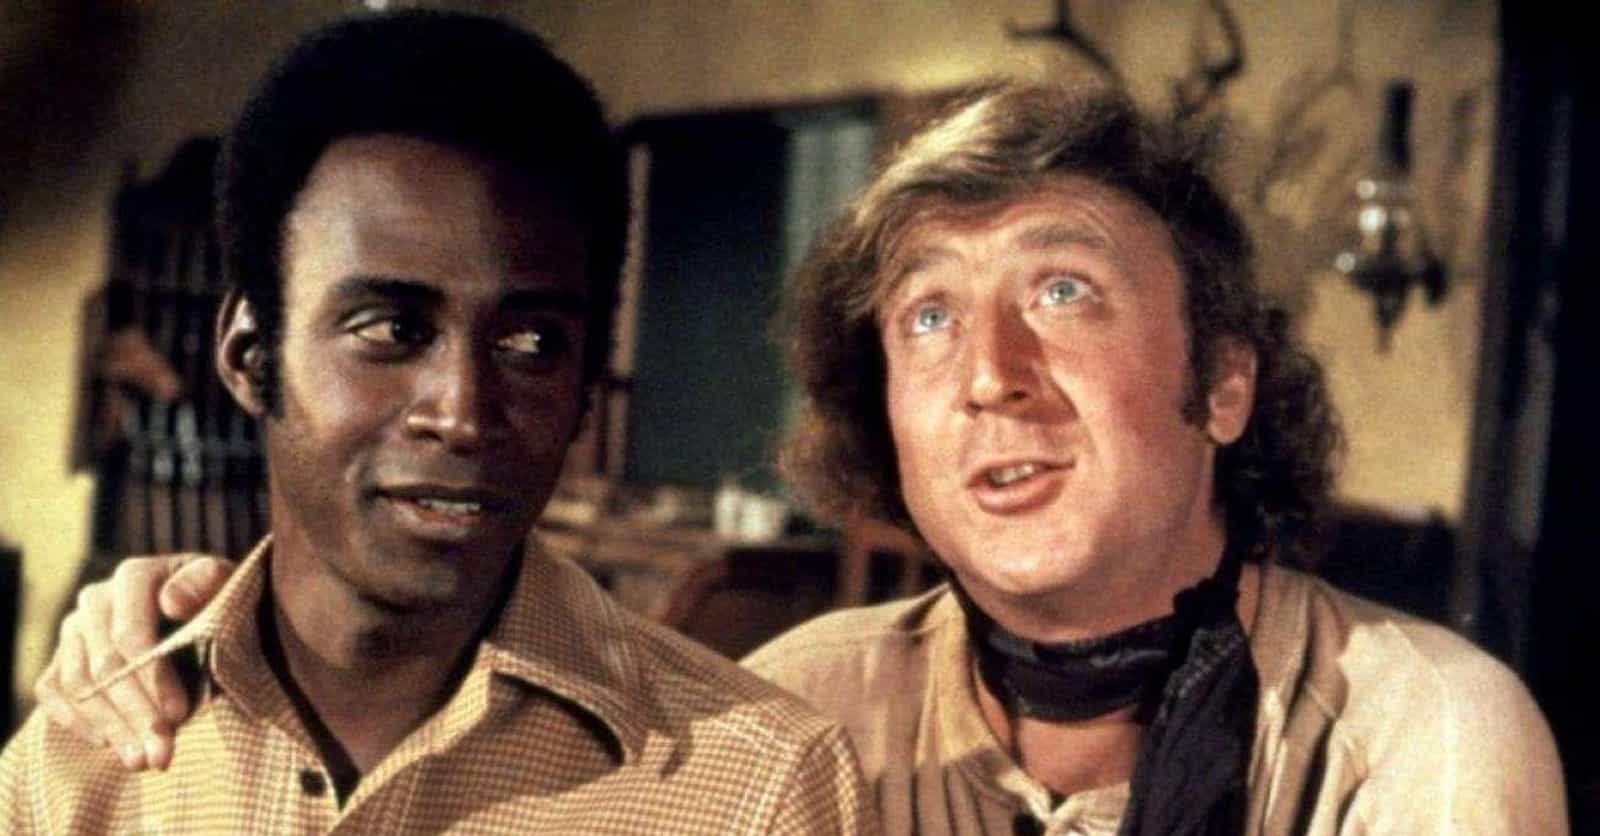 13 Behind-The-Scenes Stories From The Making Of 'Blazing Saddles'